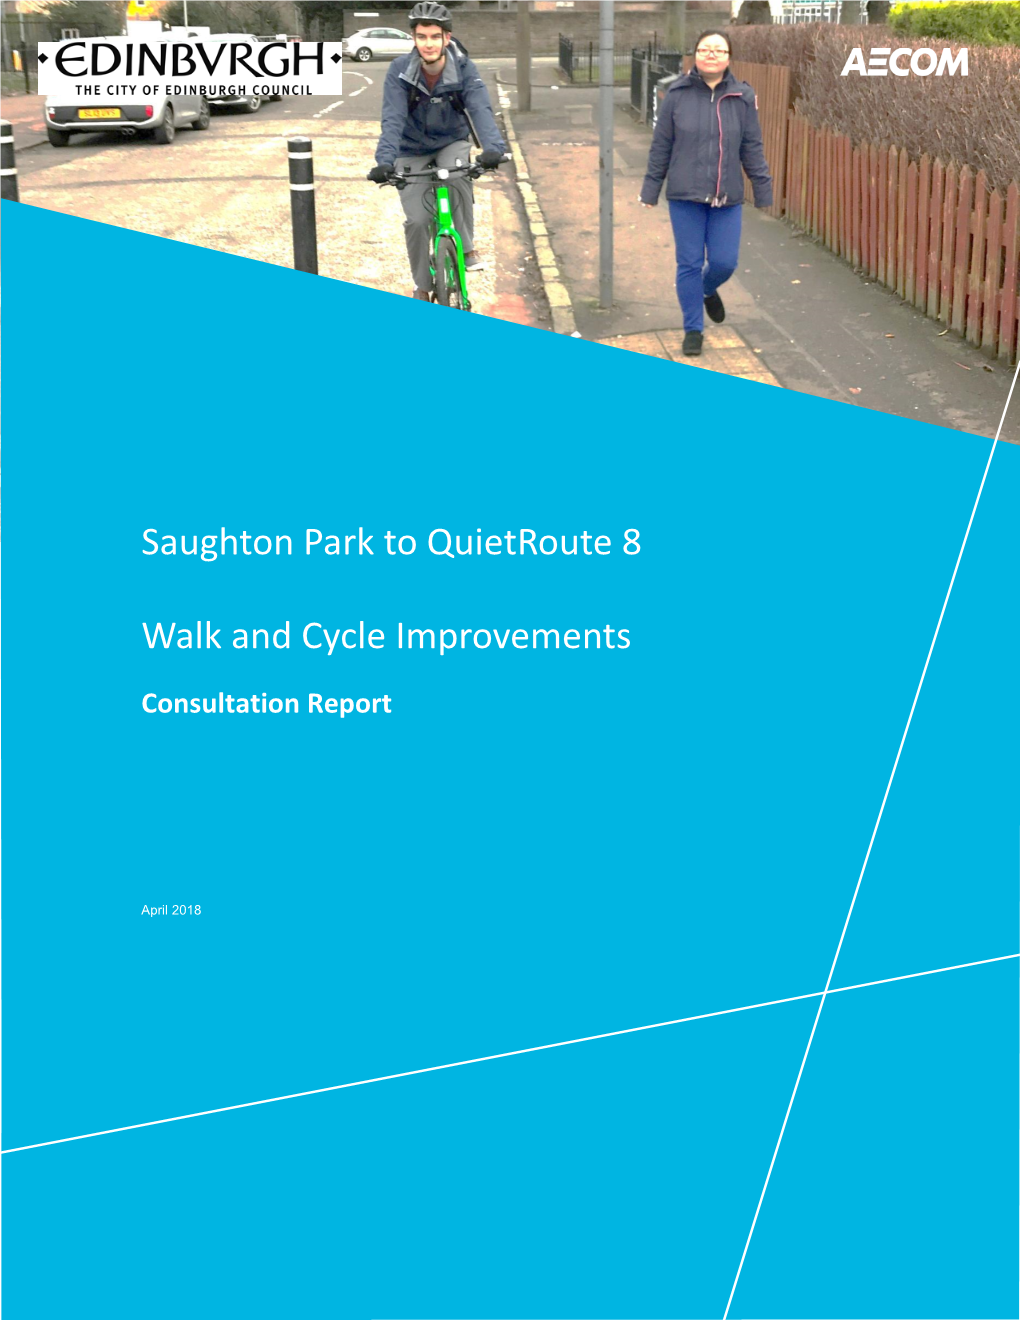 Saughton Park to Quietroute 8 Walk and Cycle Improvements